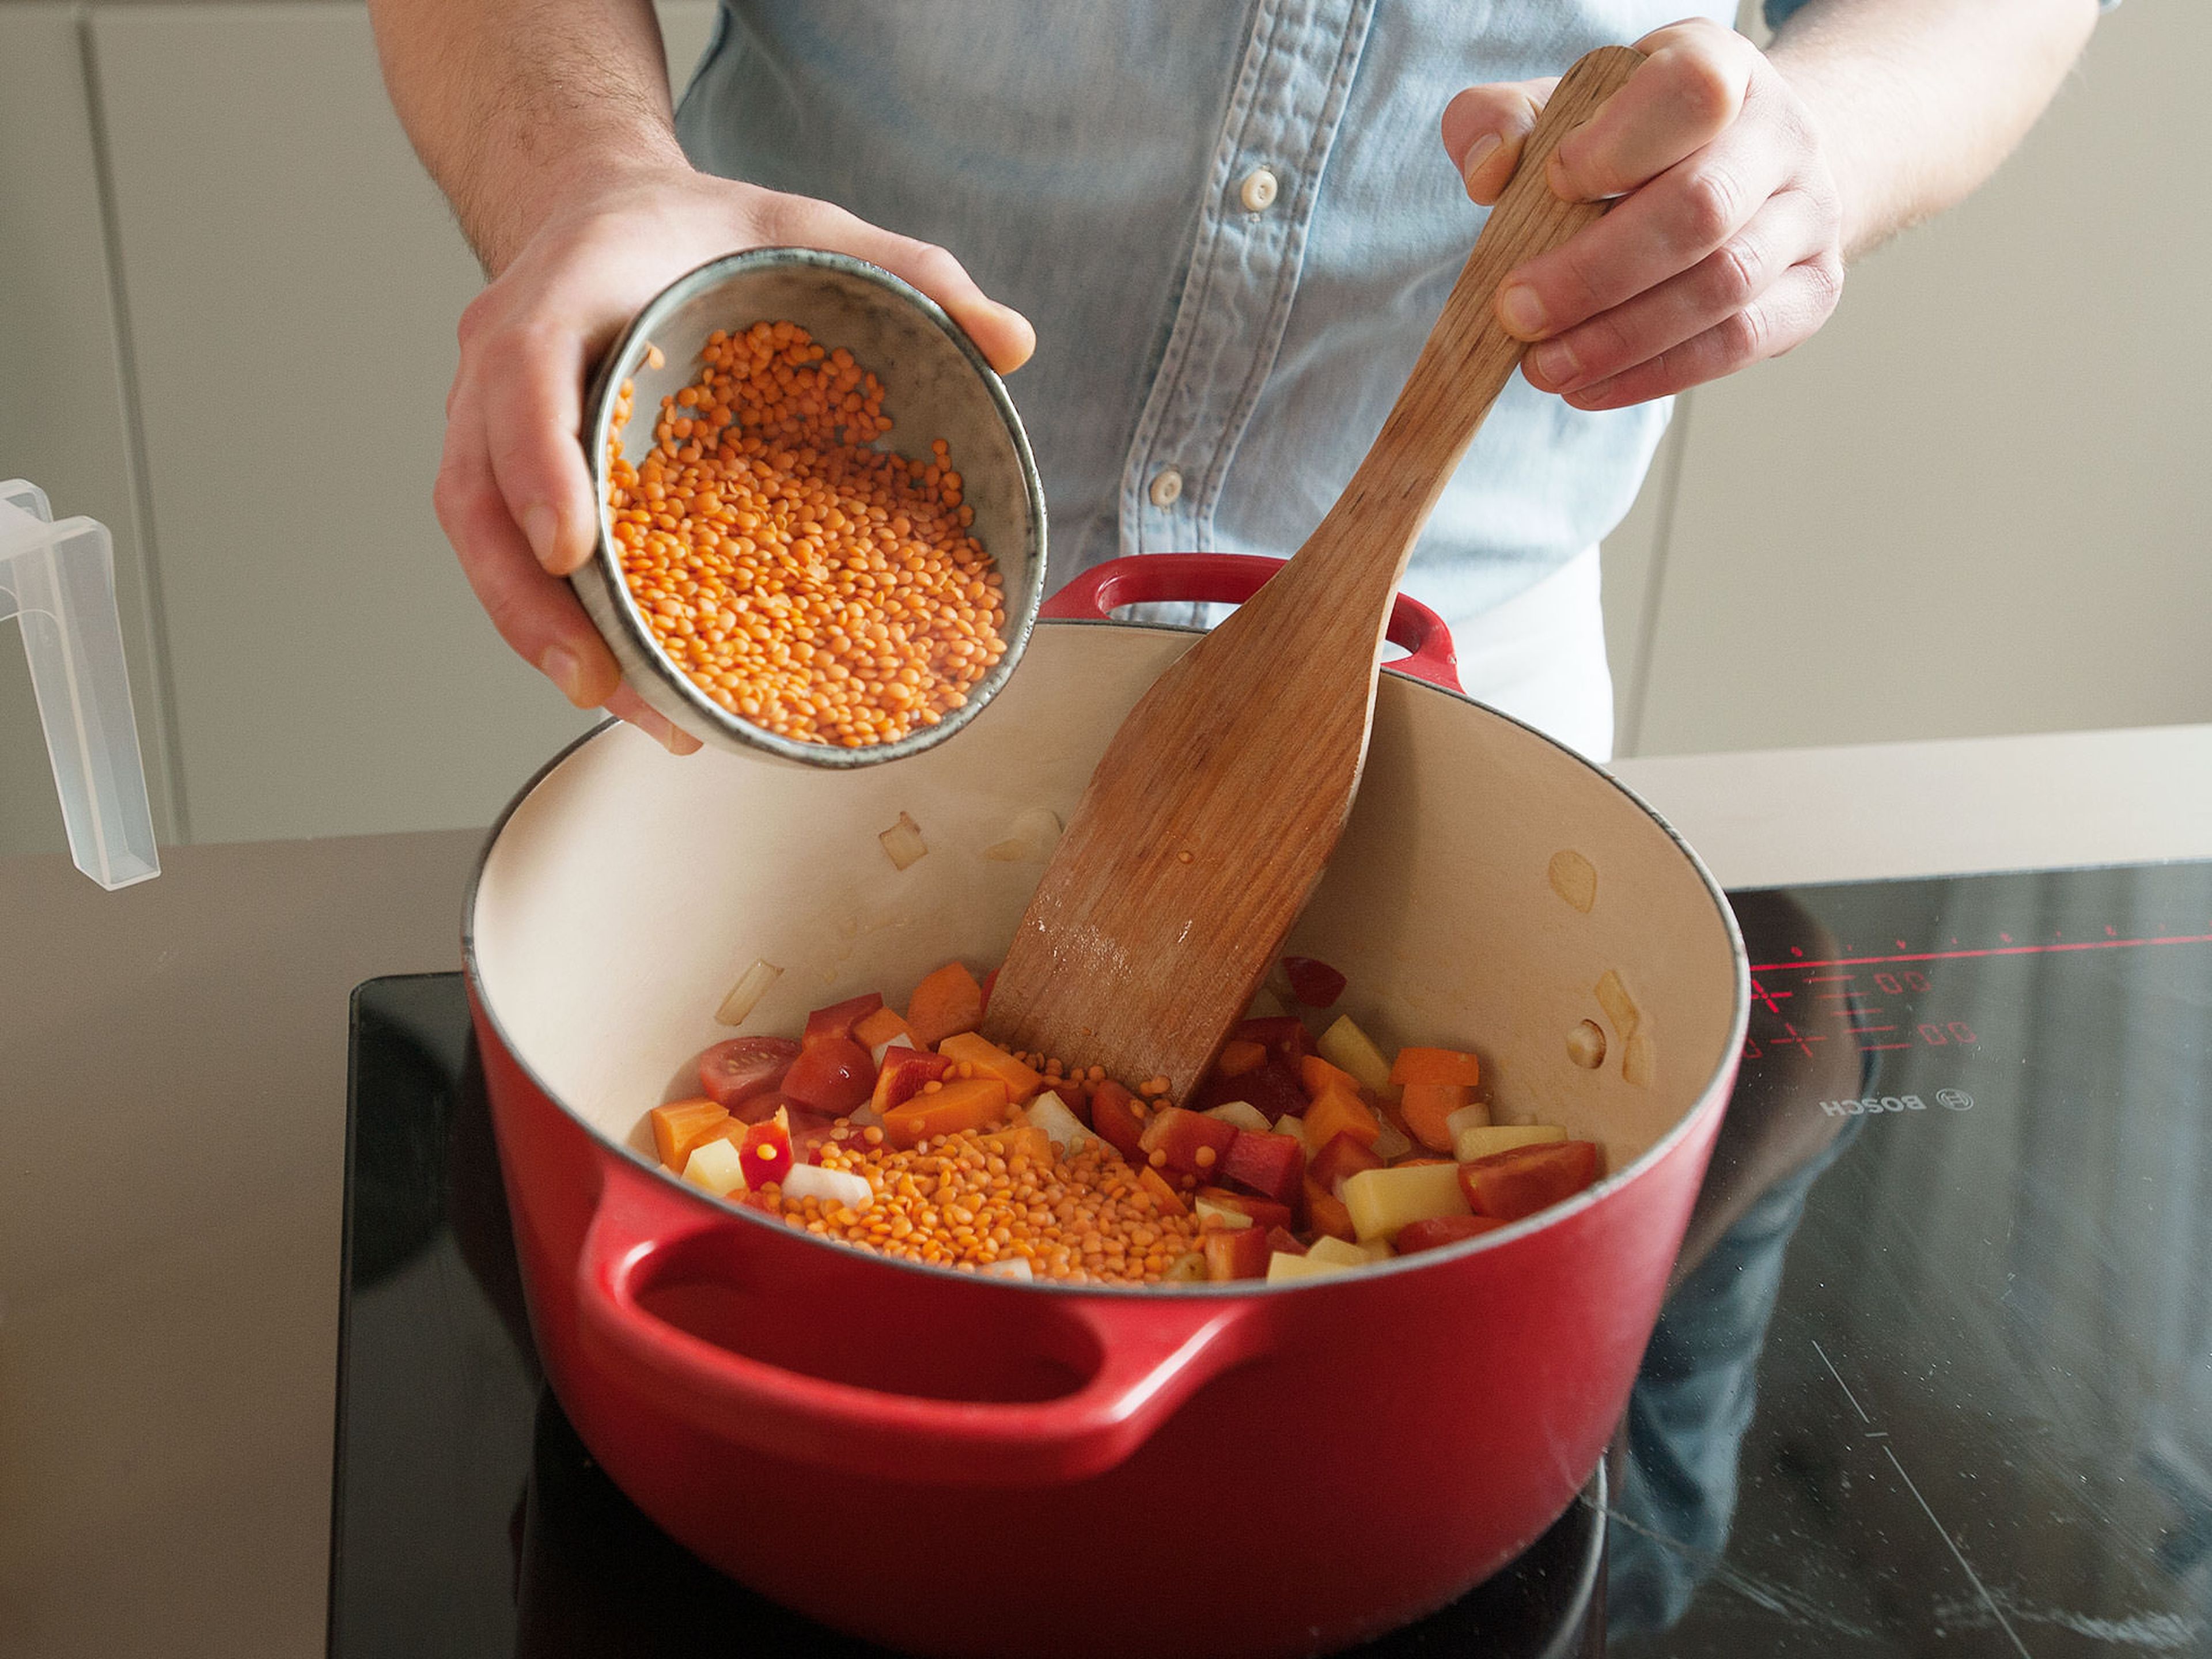 Melt some of the butter in a medium-sized pot over medium-high heat. Add onions and sauté until translucent. Add garlic, chili, tomatoes, bell pepper, carrot, potato, some of the ground paprika or our AROMEN REICHTUM seasoning (if using), and lentils. Cook for approx. 3 – 5 more min.